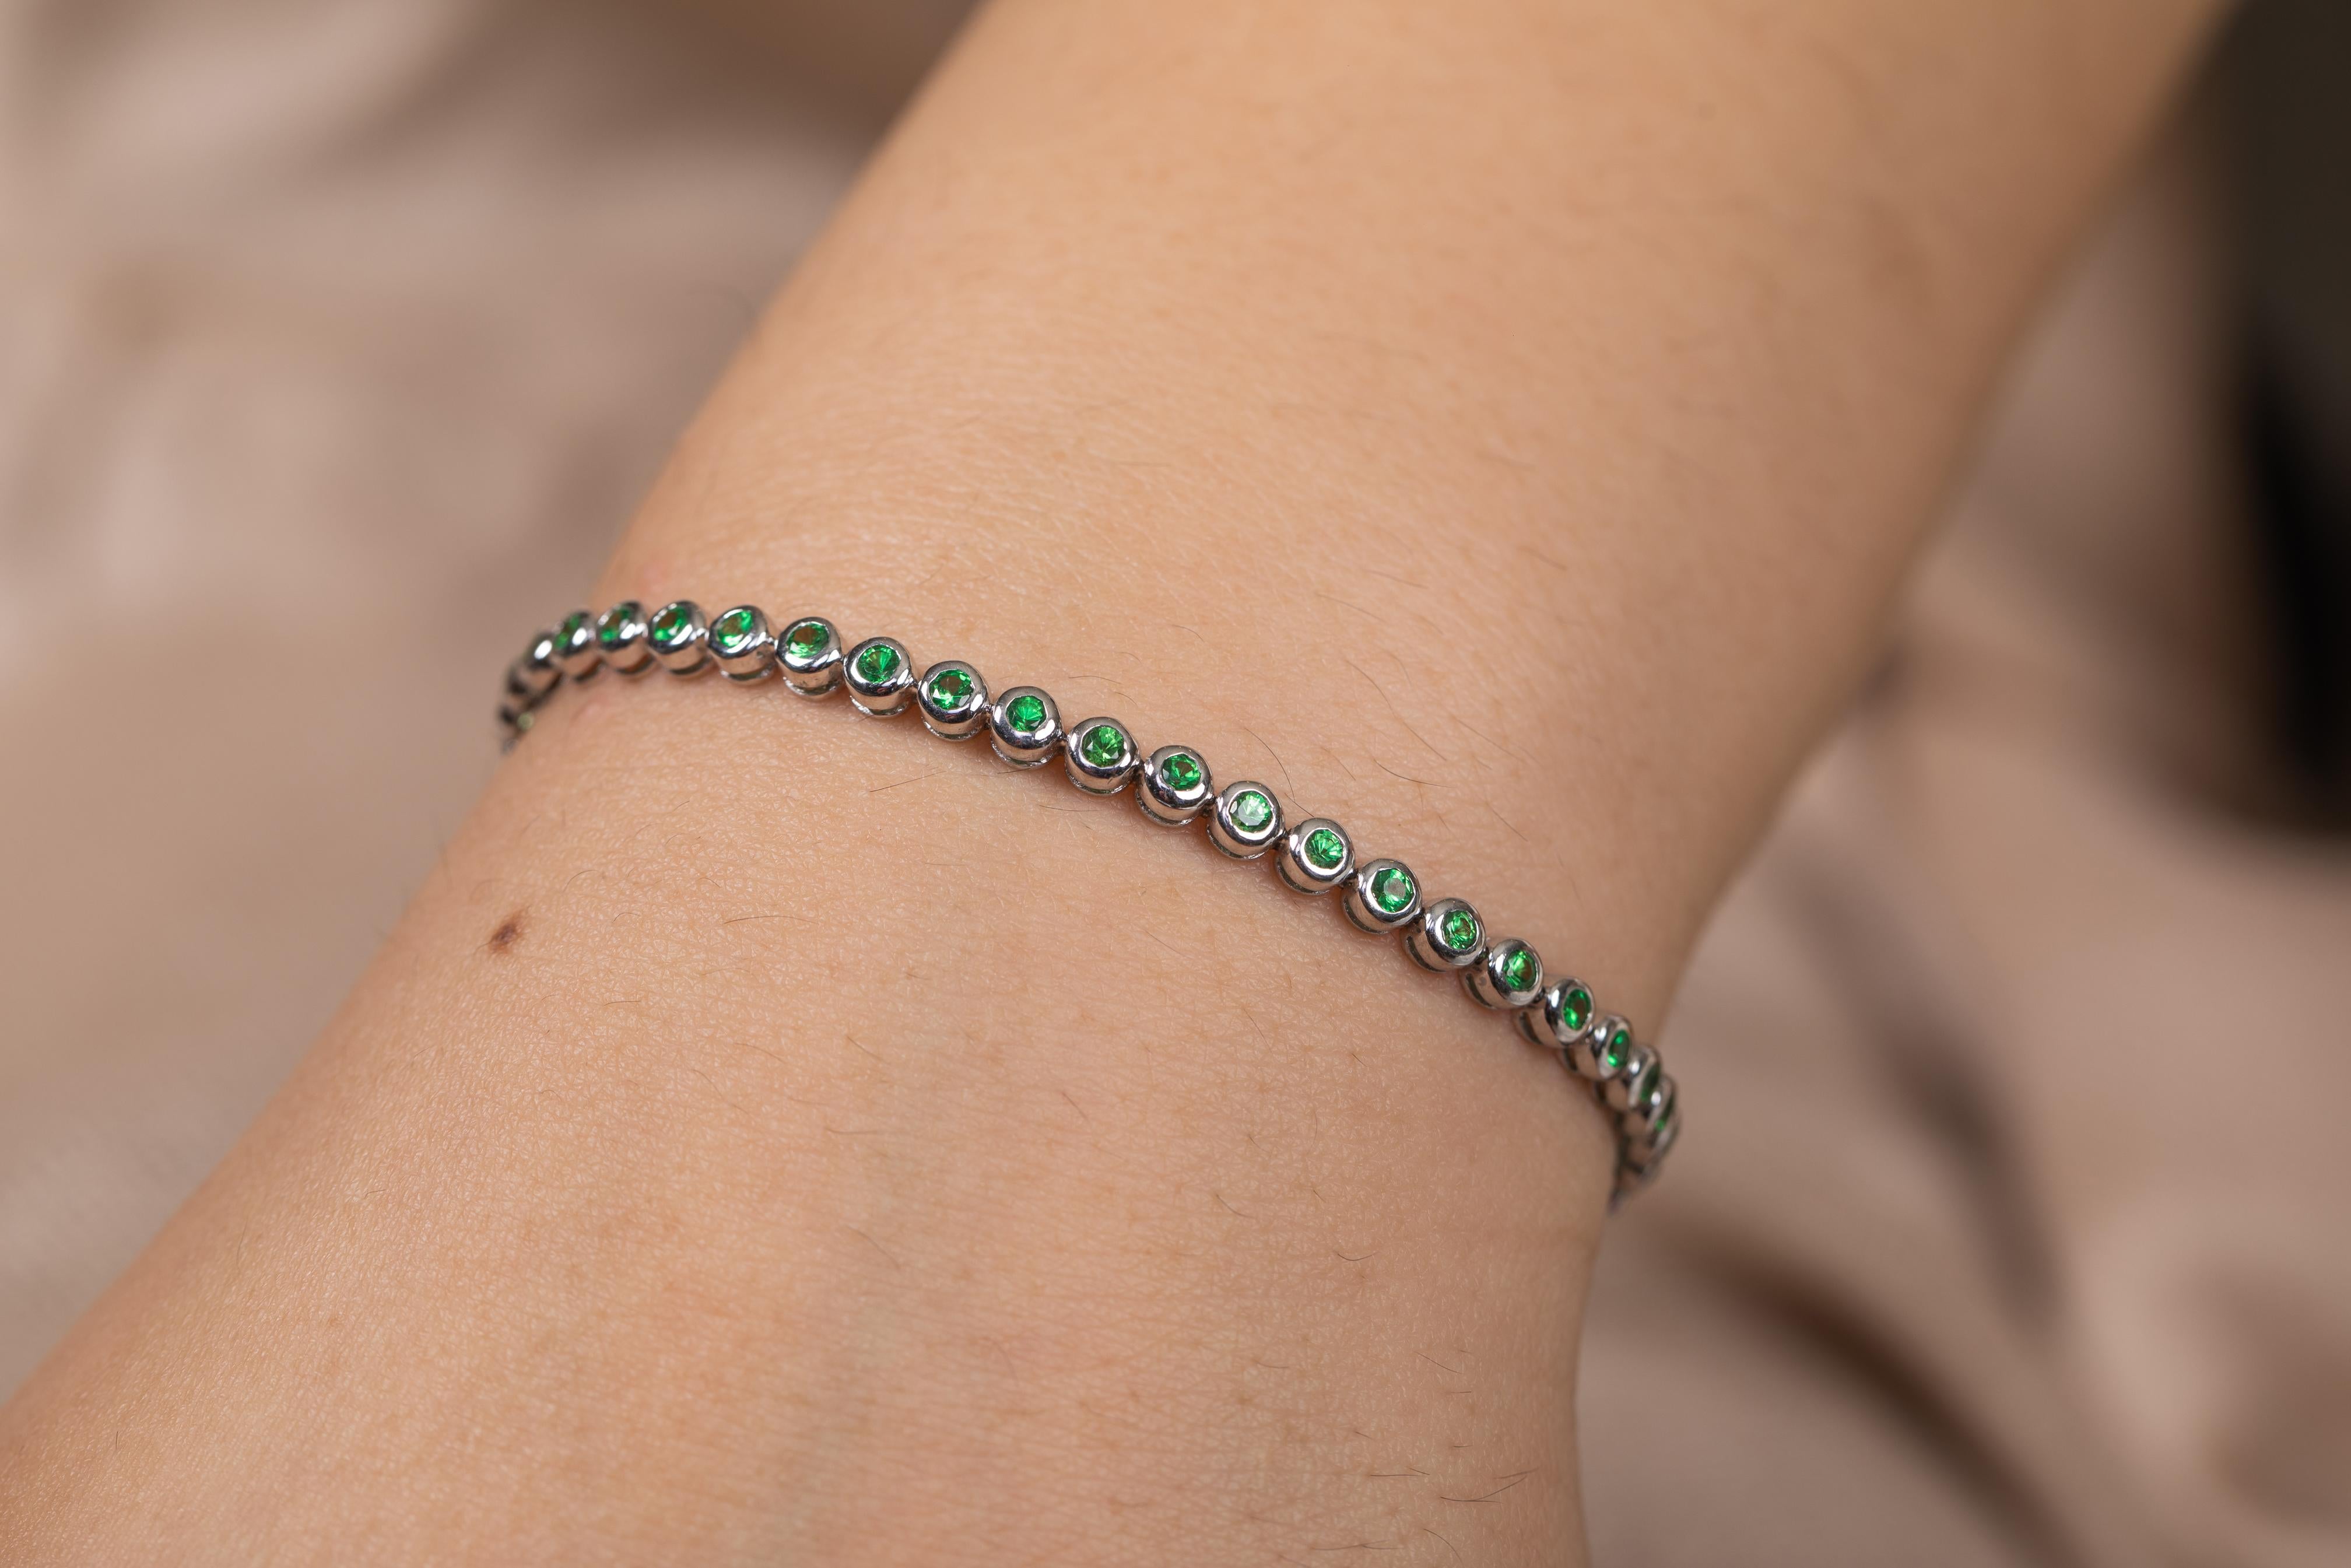 18k Solid White Gold Dainty Round Cut  Natural Tsavorite Tennis Bracelet For Her For Sale 1